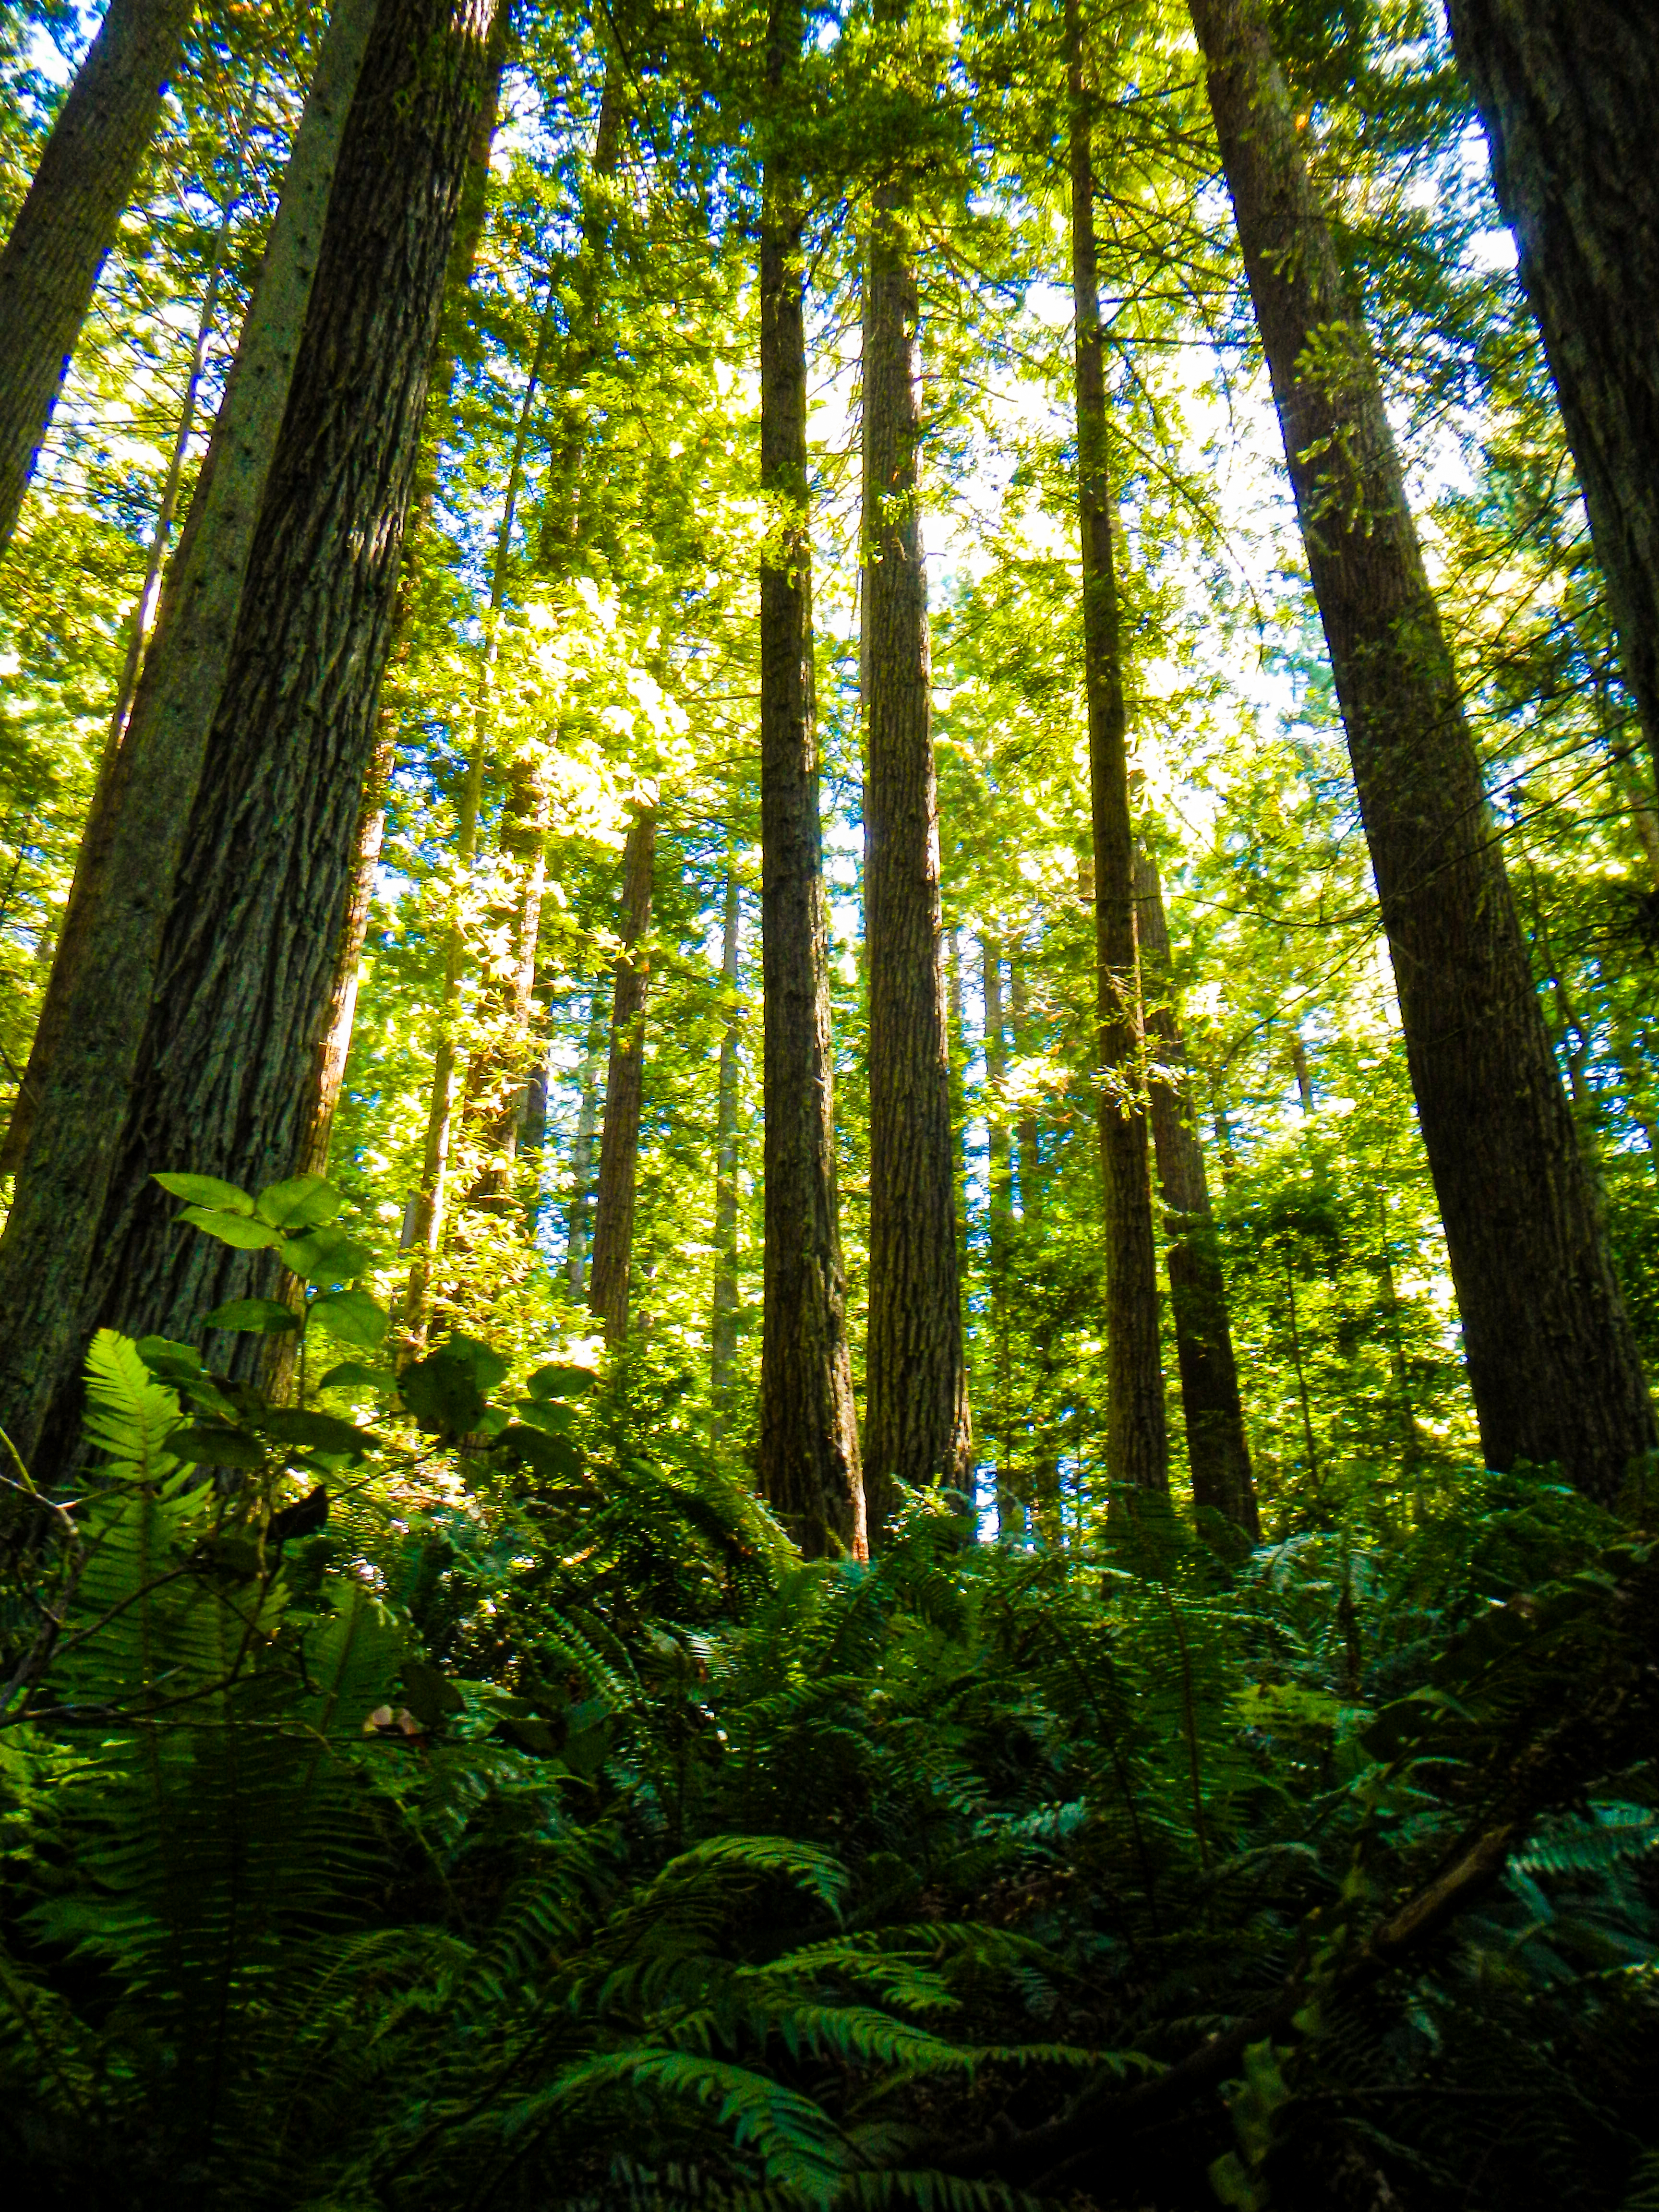 A view looking up at redwood trees from underneath. Light streams in from behind, and the surrounding forest is lush and green.